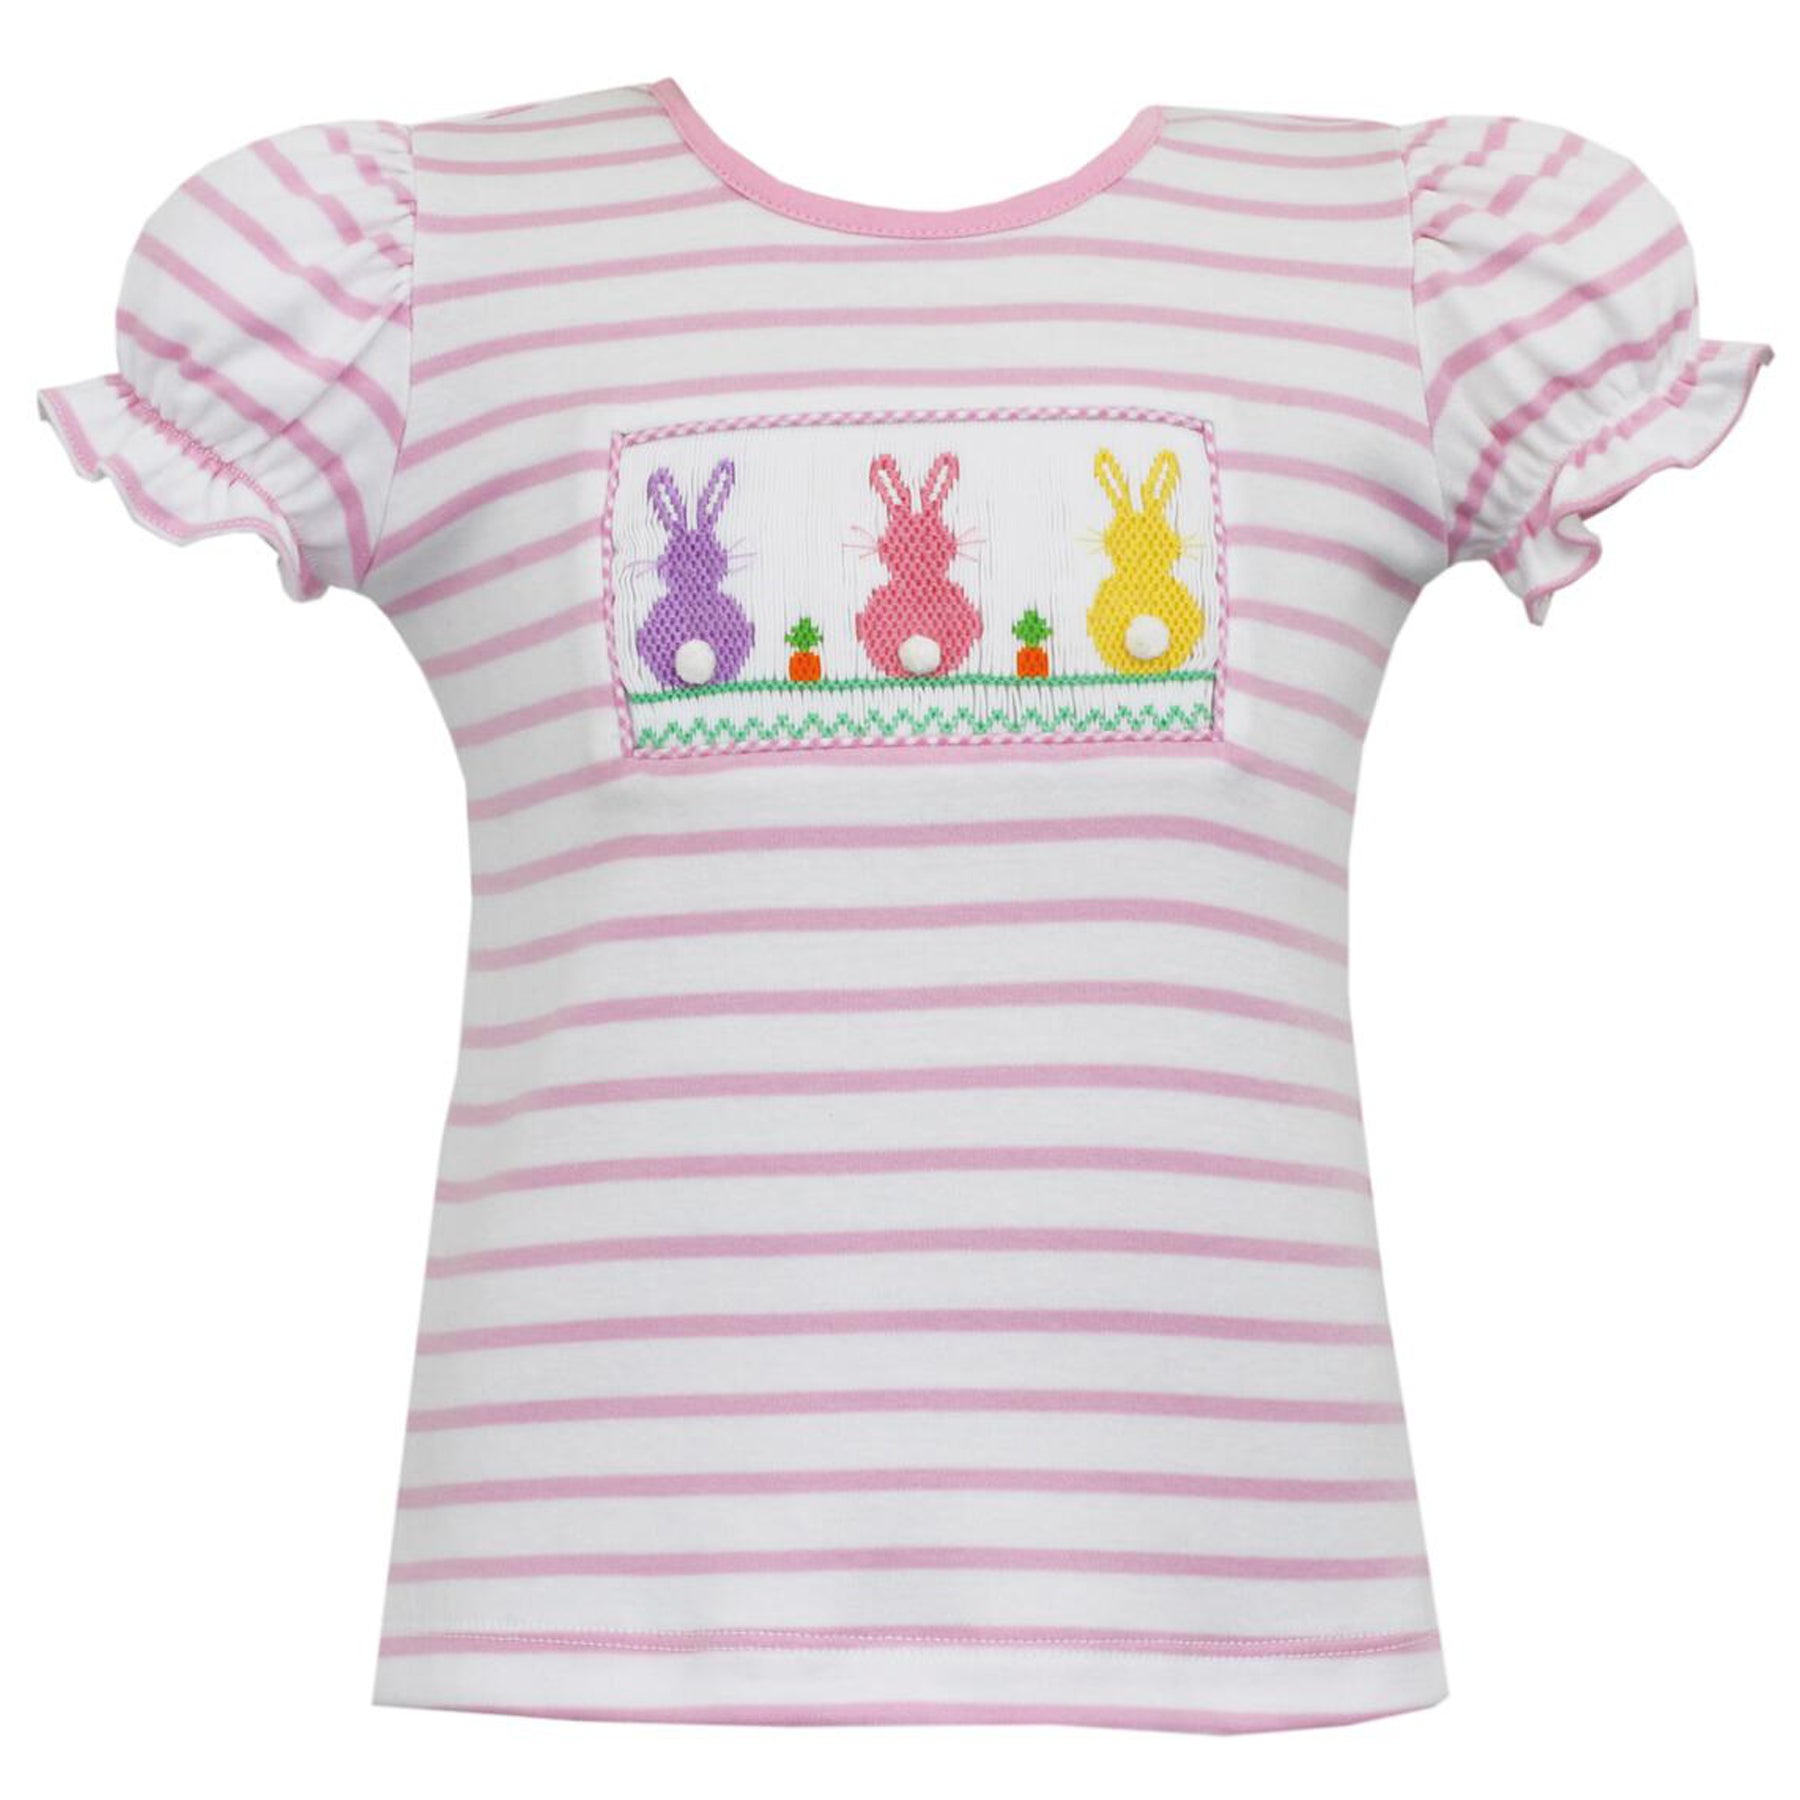 Cottontails Pink & White Girls Knit T-Shirt